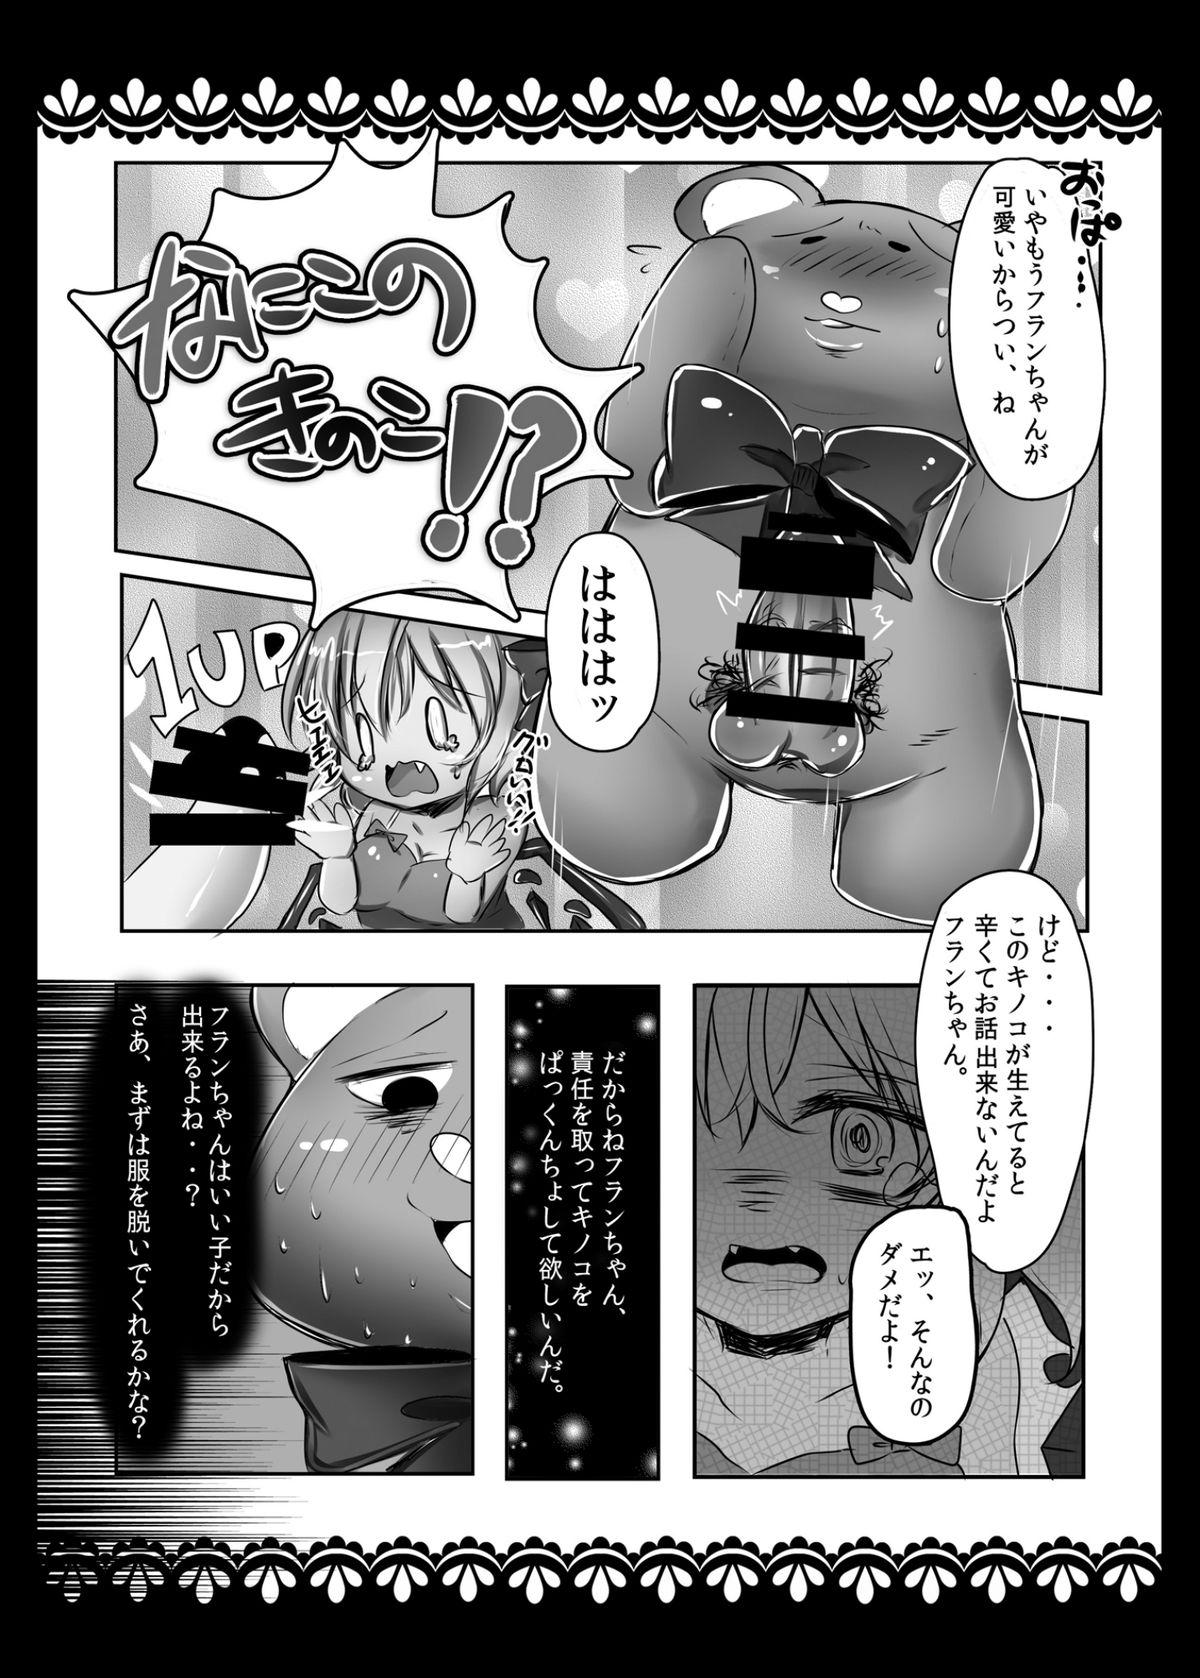 Oral Sex Stuffed Animal Paco - Touhou project Group Sex - Page 8